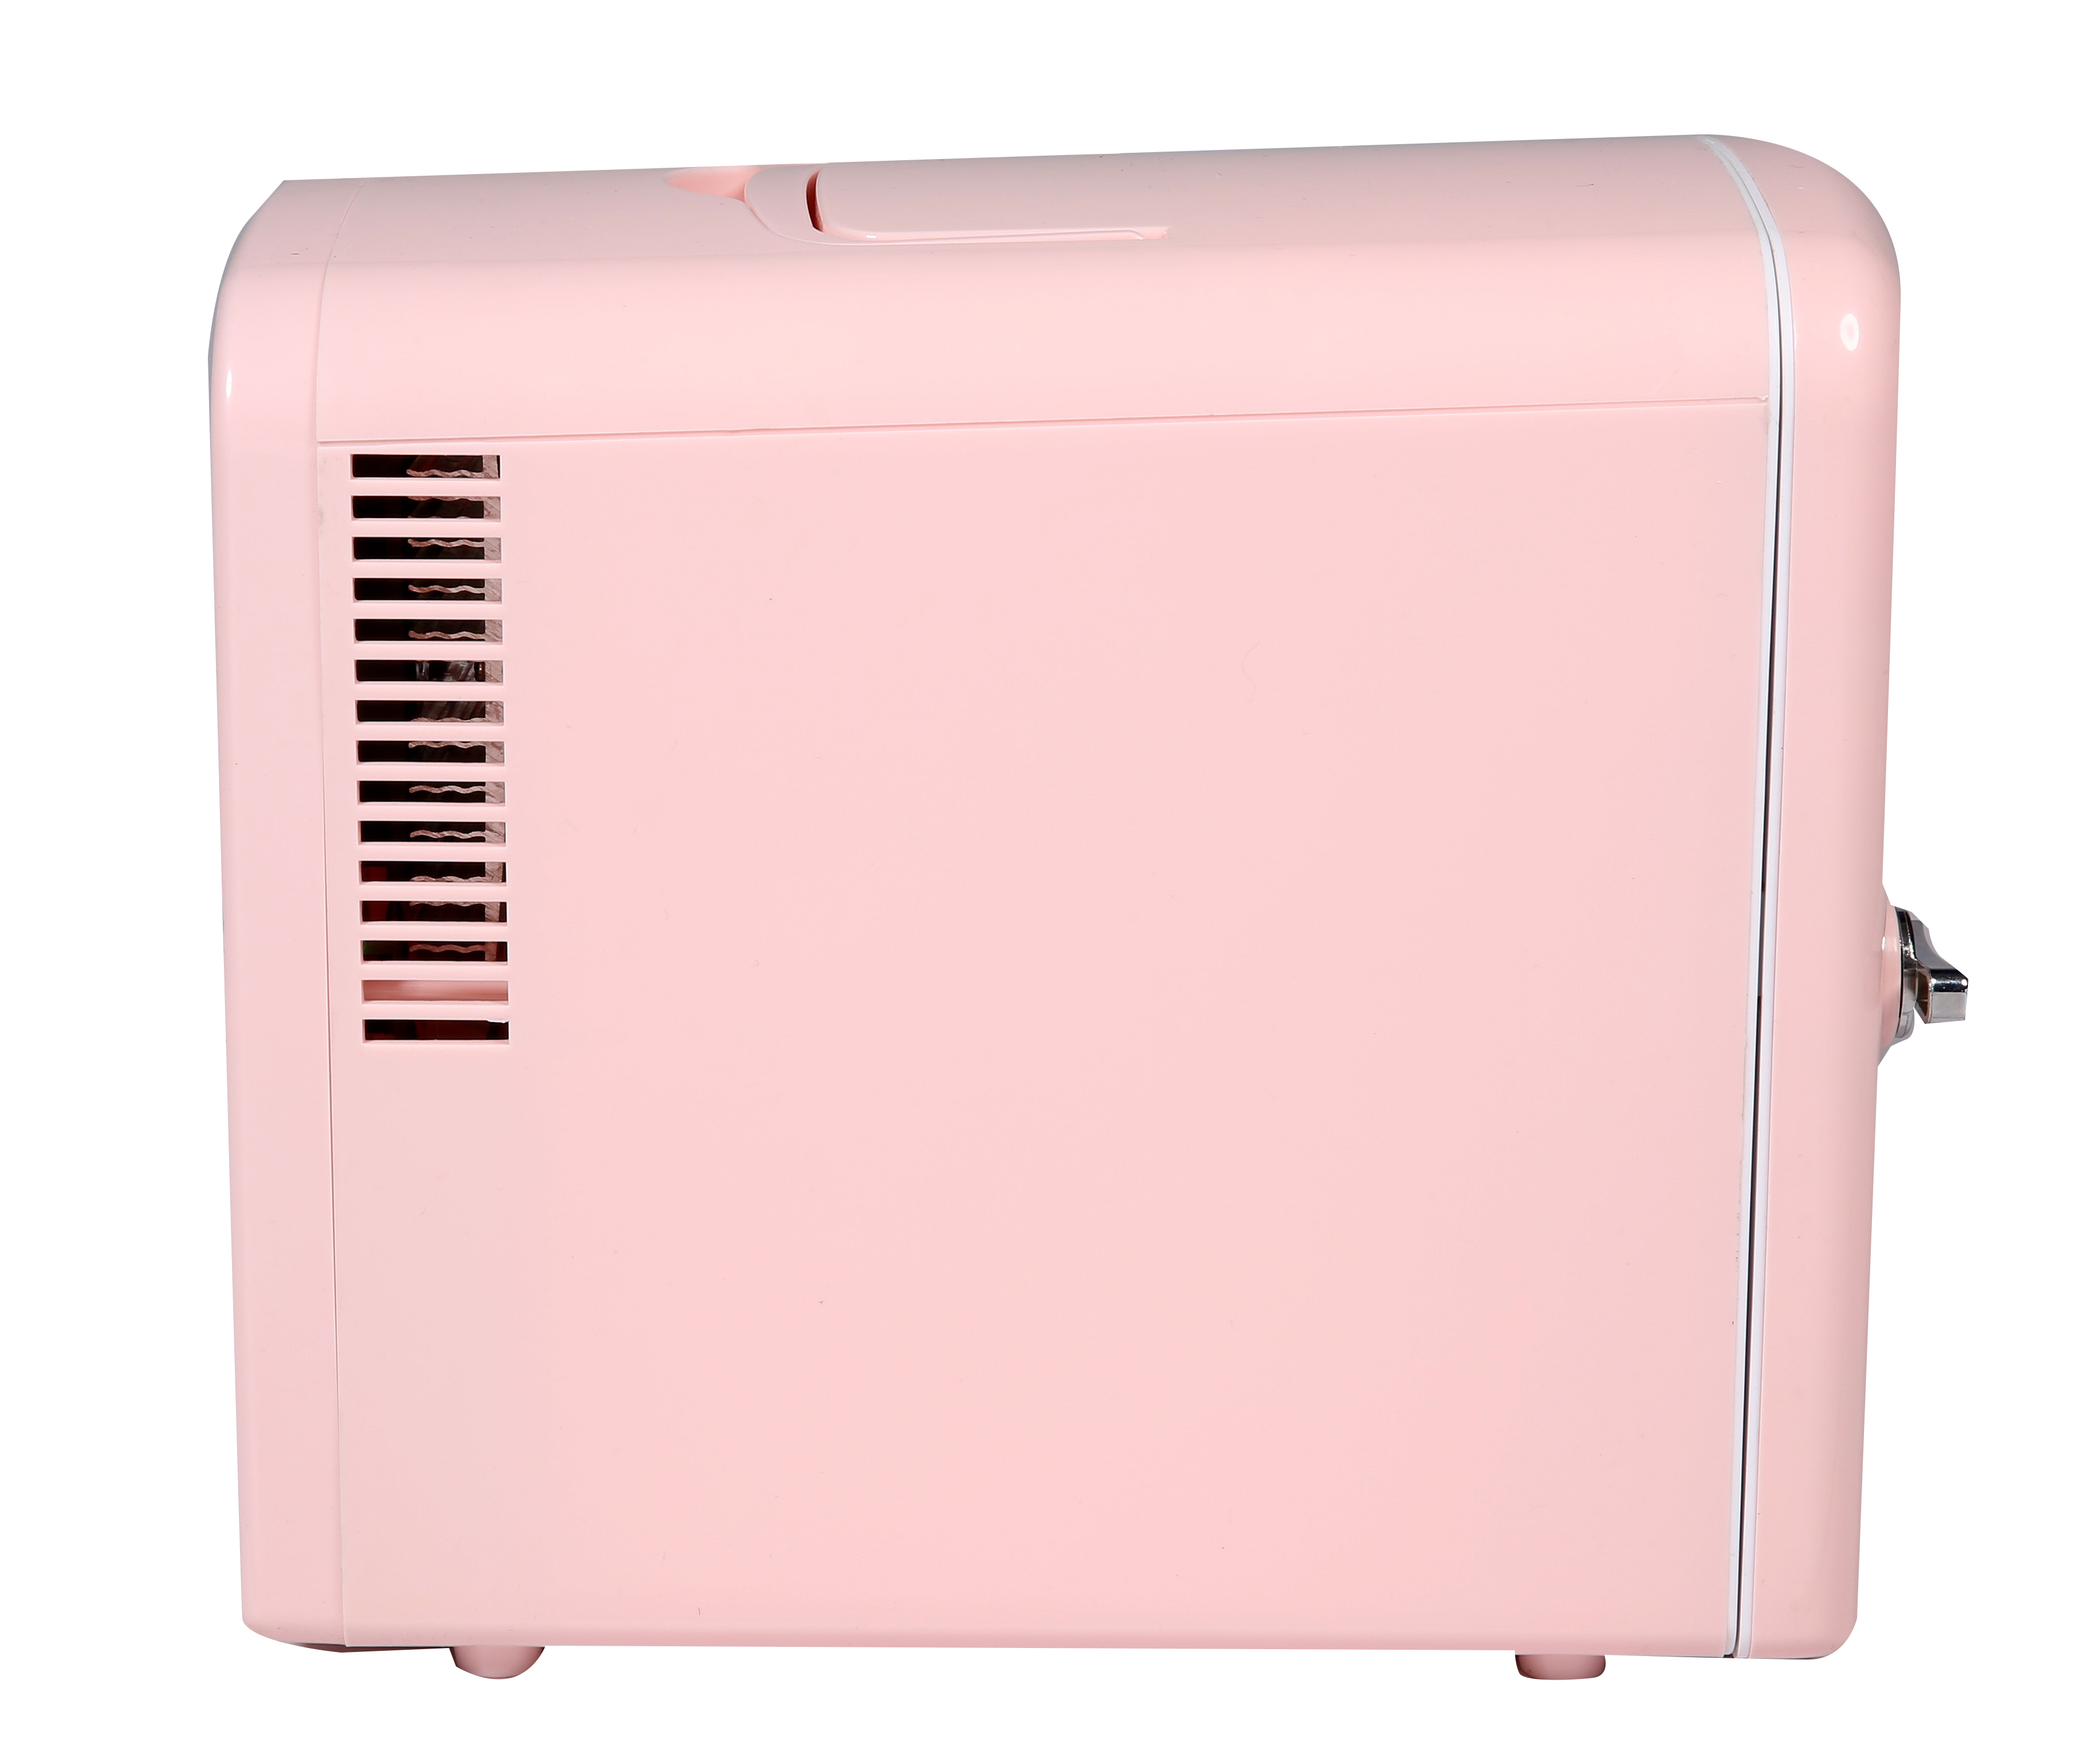 Frigidaire Portable Retro Extra Large 9-Can Capacity Mini Cooler, EFMIS175, Pink - image 3 of 10